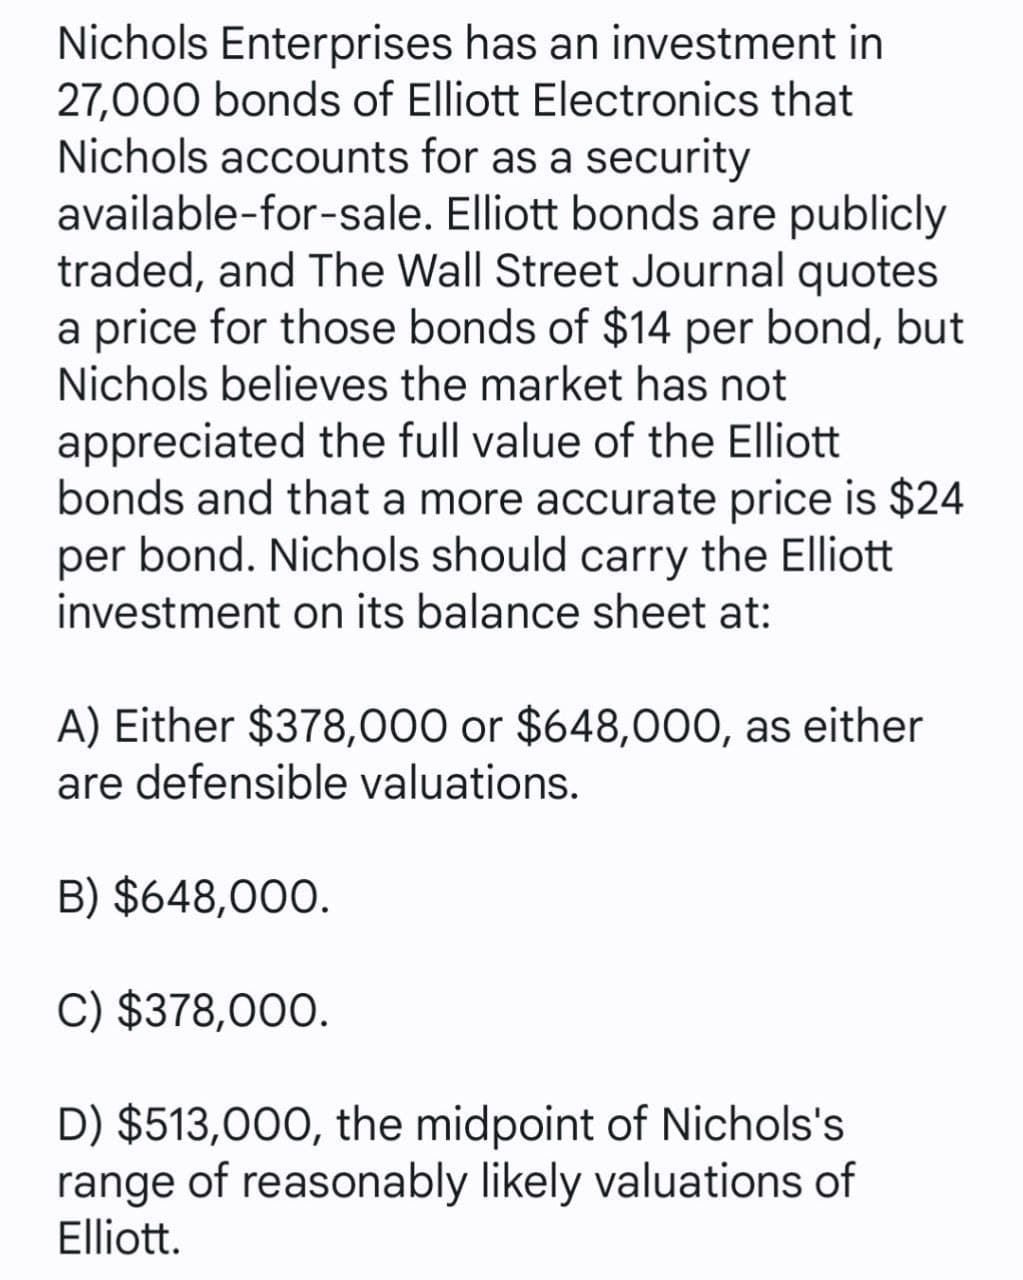 Nichols Enterprises has an investment in
27,000 bonds of Elliott Electronics that
Nichols accounts for as a security
available-for-sale. Elliott bonds are publicly
traded, and The Wall Street Journal quotes
a price for those bonds of $14 per bond, but
Nichols believes the market has not
appreciated the full value of the Elliott
bonds and that a more accurate price is $24
per bond. Nichols should carry the Elliott
investment on its balance sheet at:
A) Either $378,000 or $648,000, as either
are defensible valuations.
B) $648,000.
C) $378,000.
D) $513,000, the midpoint of Nichols's
range of reasonably likely valuations of
Elliott.
